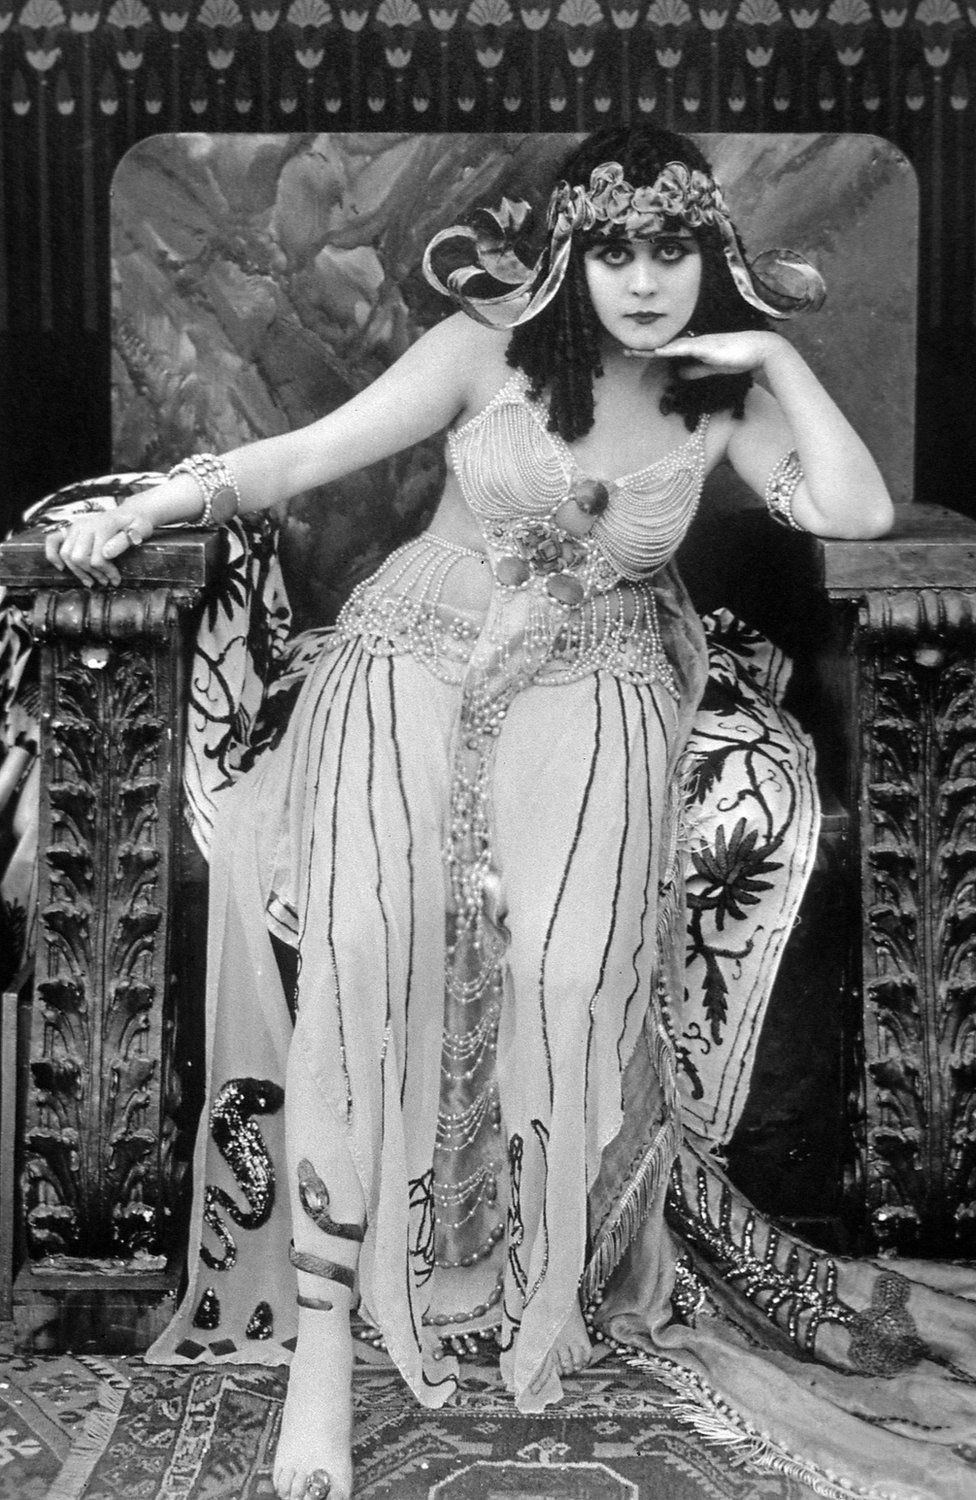 Theda Bara as Cleopatra in the 1917 film of the same name